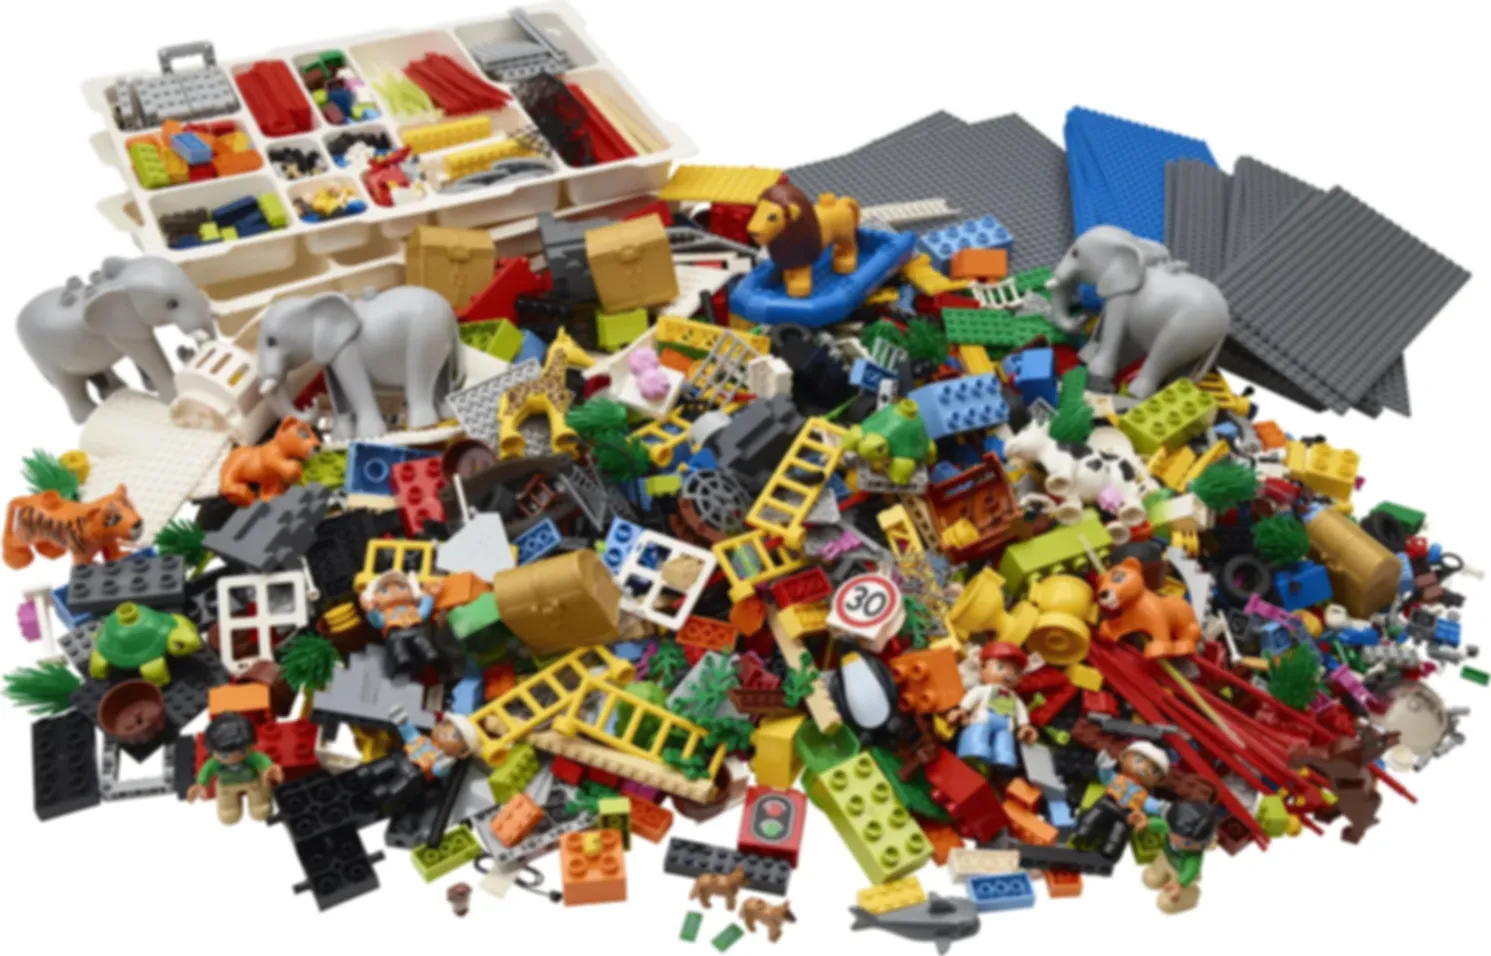 LEGO® Serious Play® Identity and Landscape Kit components